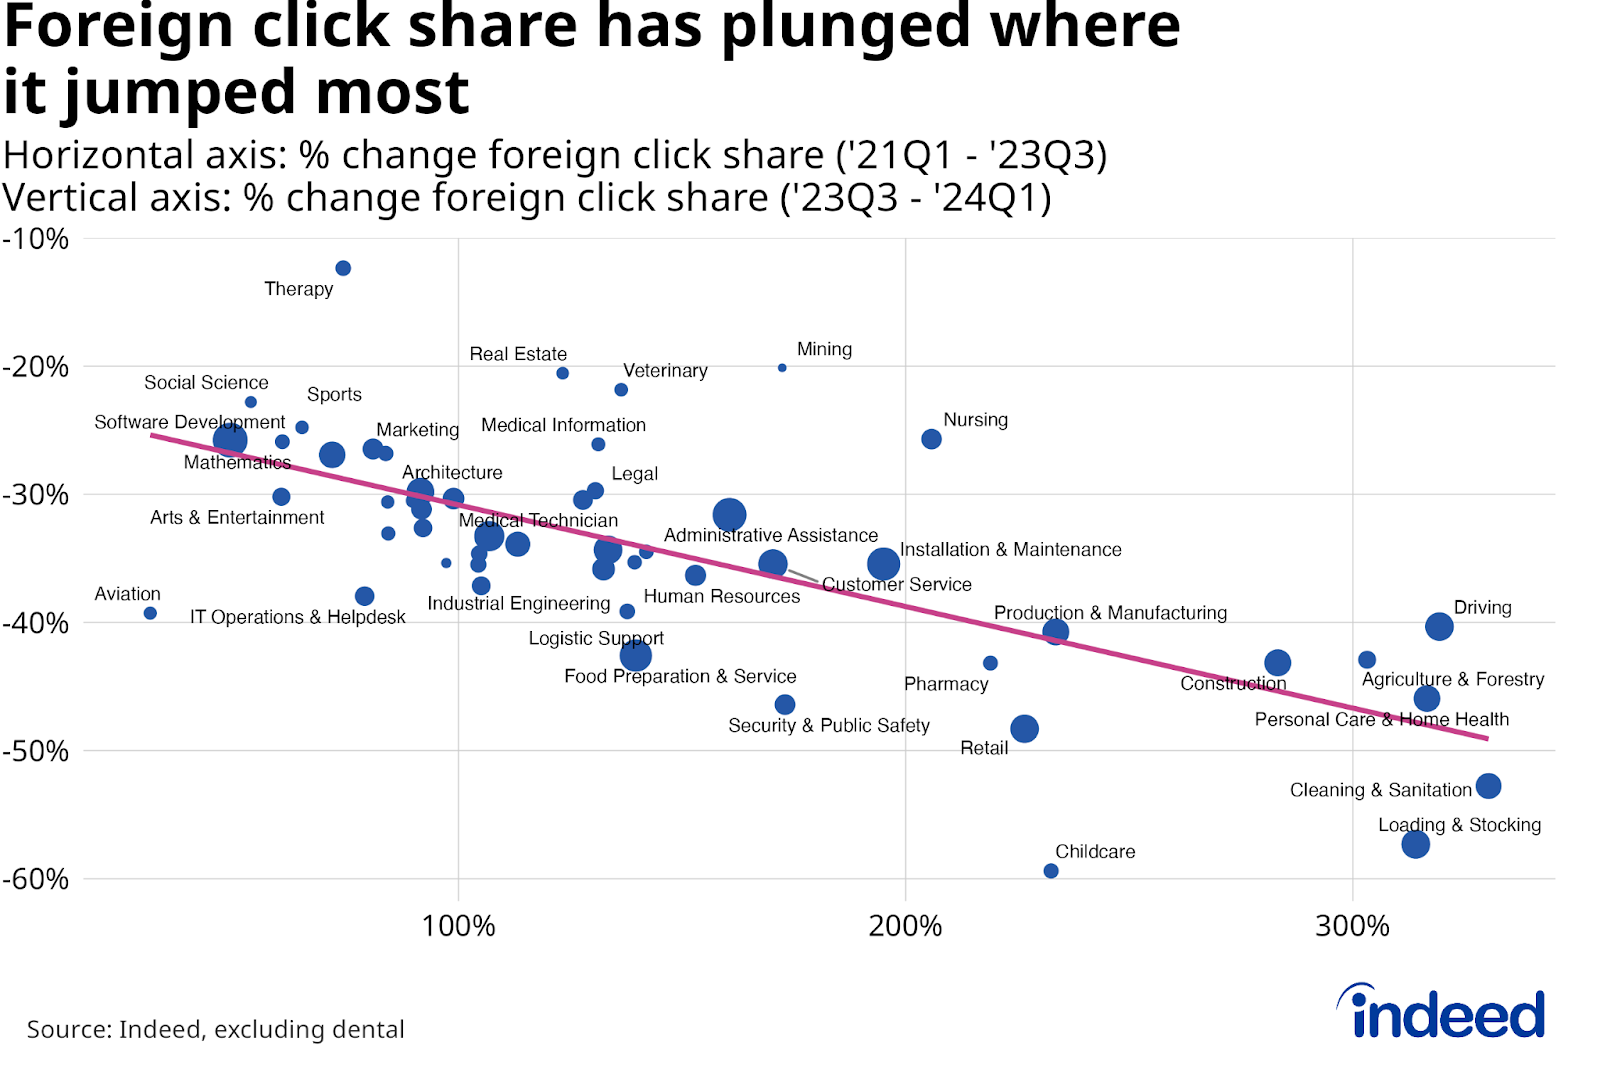 Chart titled "Foreign click share has plunged where it jumped most," shows on the horizontal axis the % change of foreign click share from Q1 2021 to Q3 2023, while the vertical axis shows the % change of foreign click share from Q3 2023 to Q1 2024. 